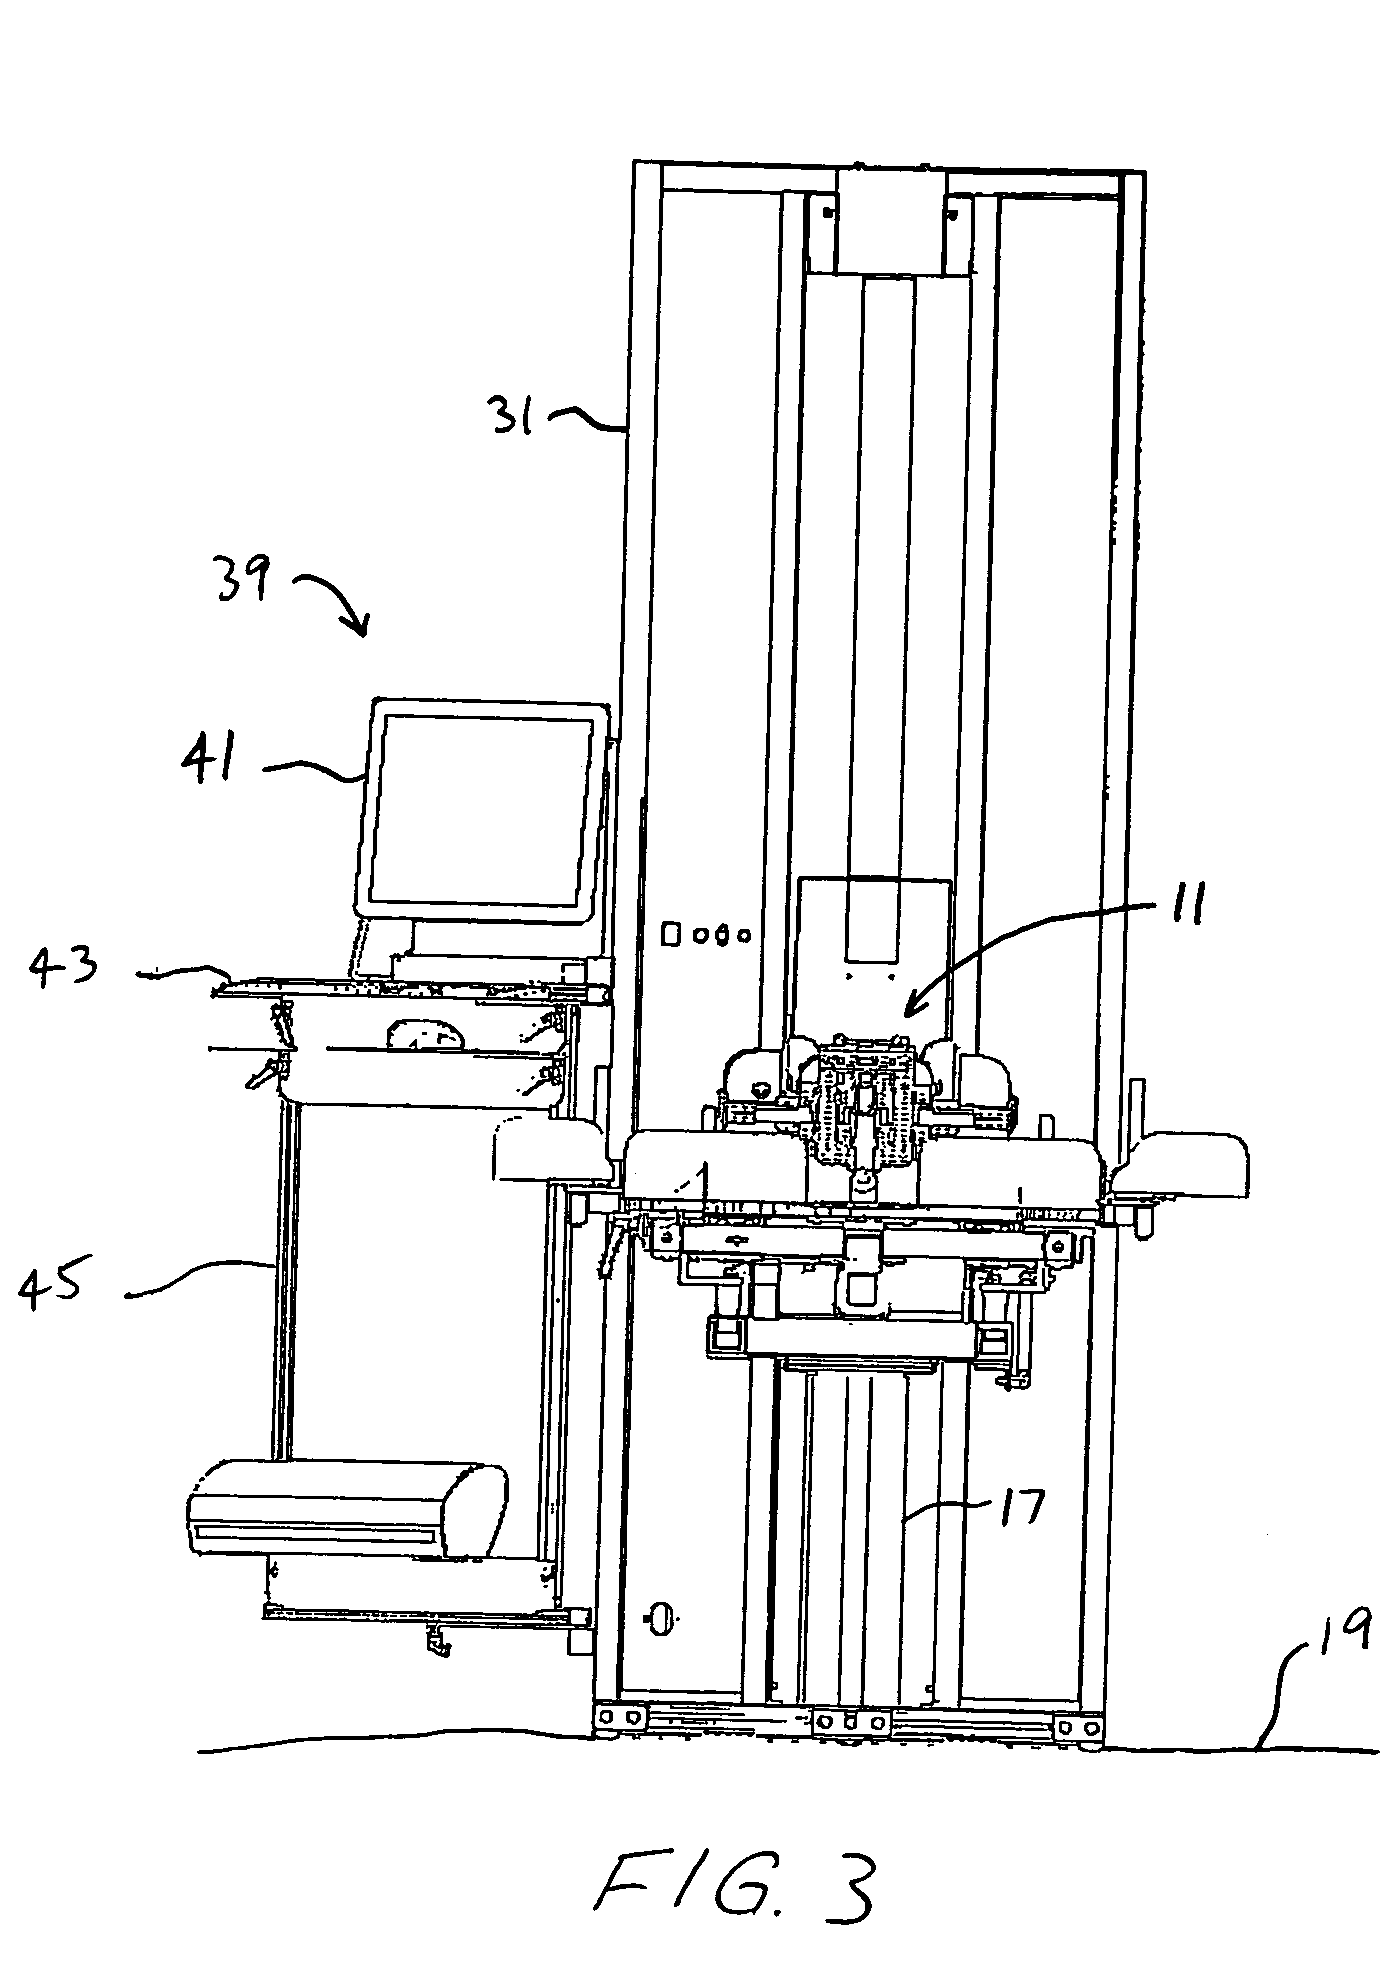 Cervical distraction device